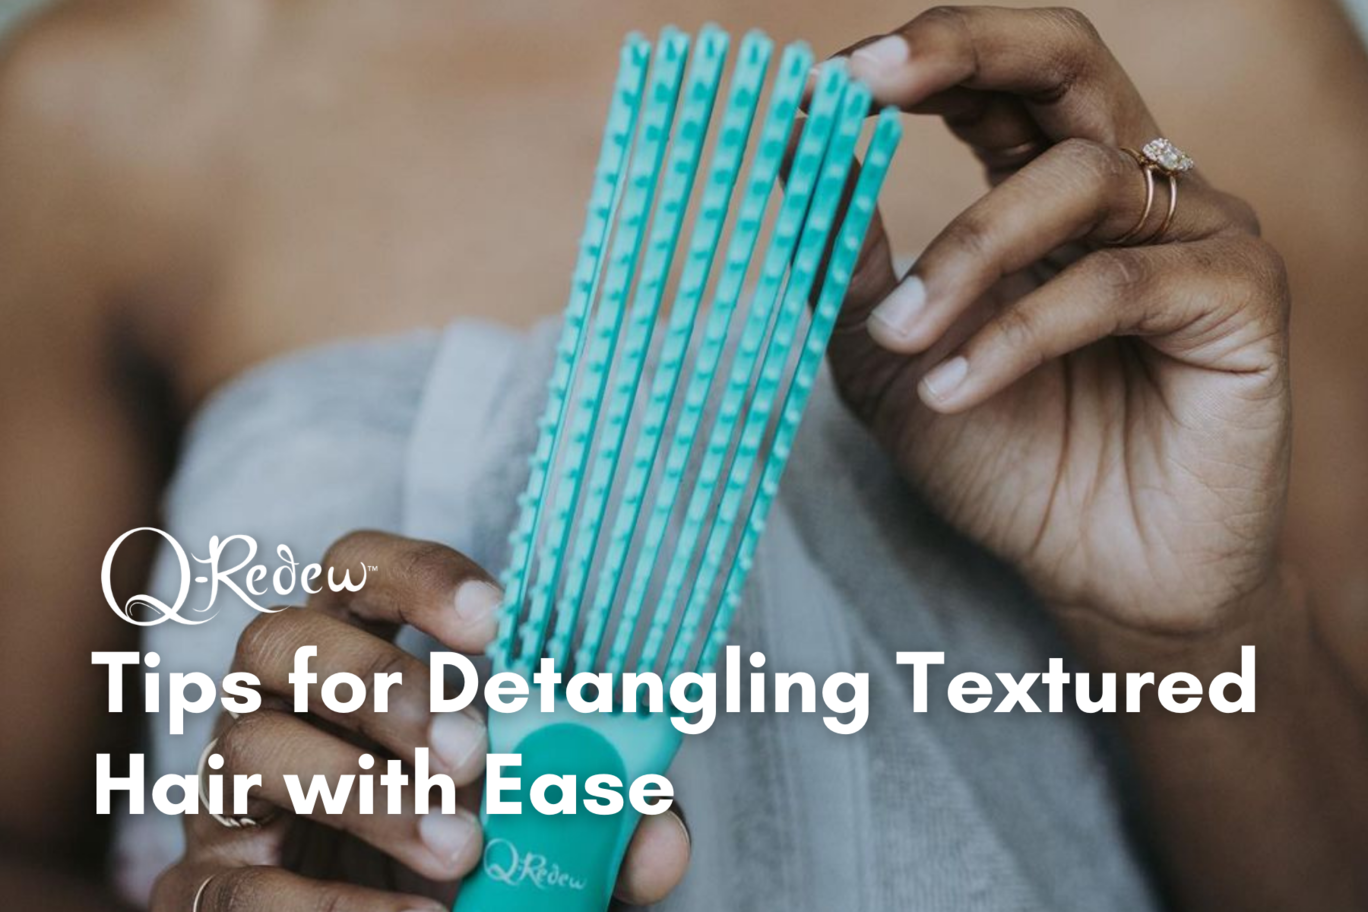 Tips for Detangling Textured Hair with Ease